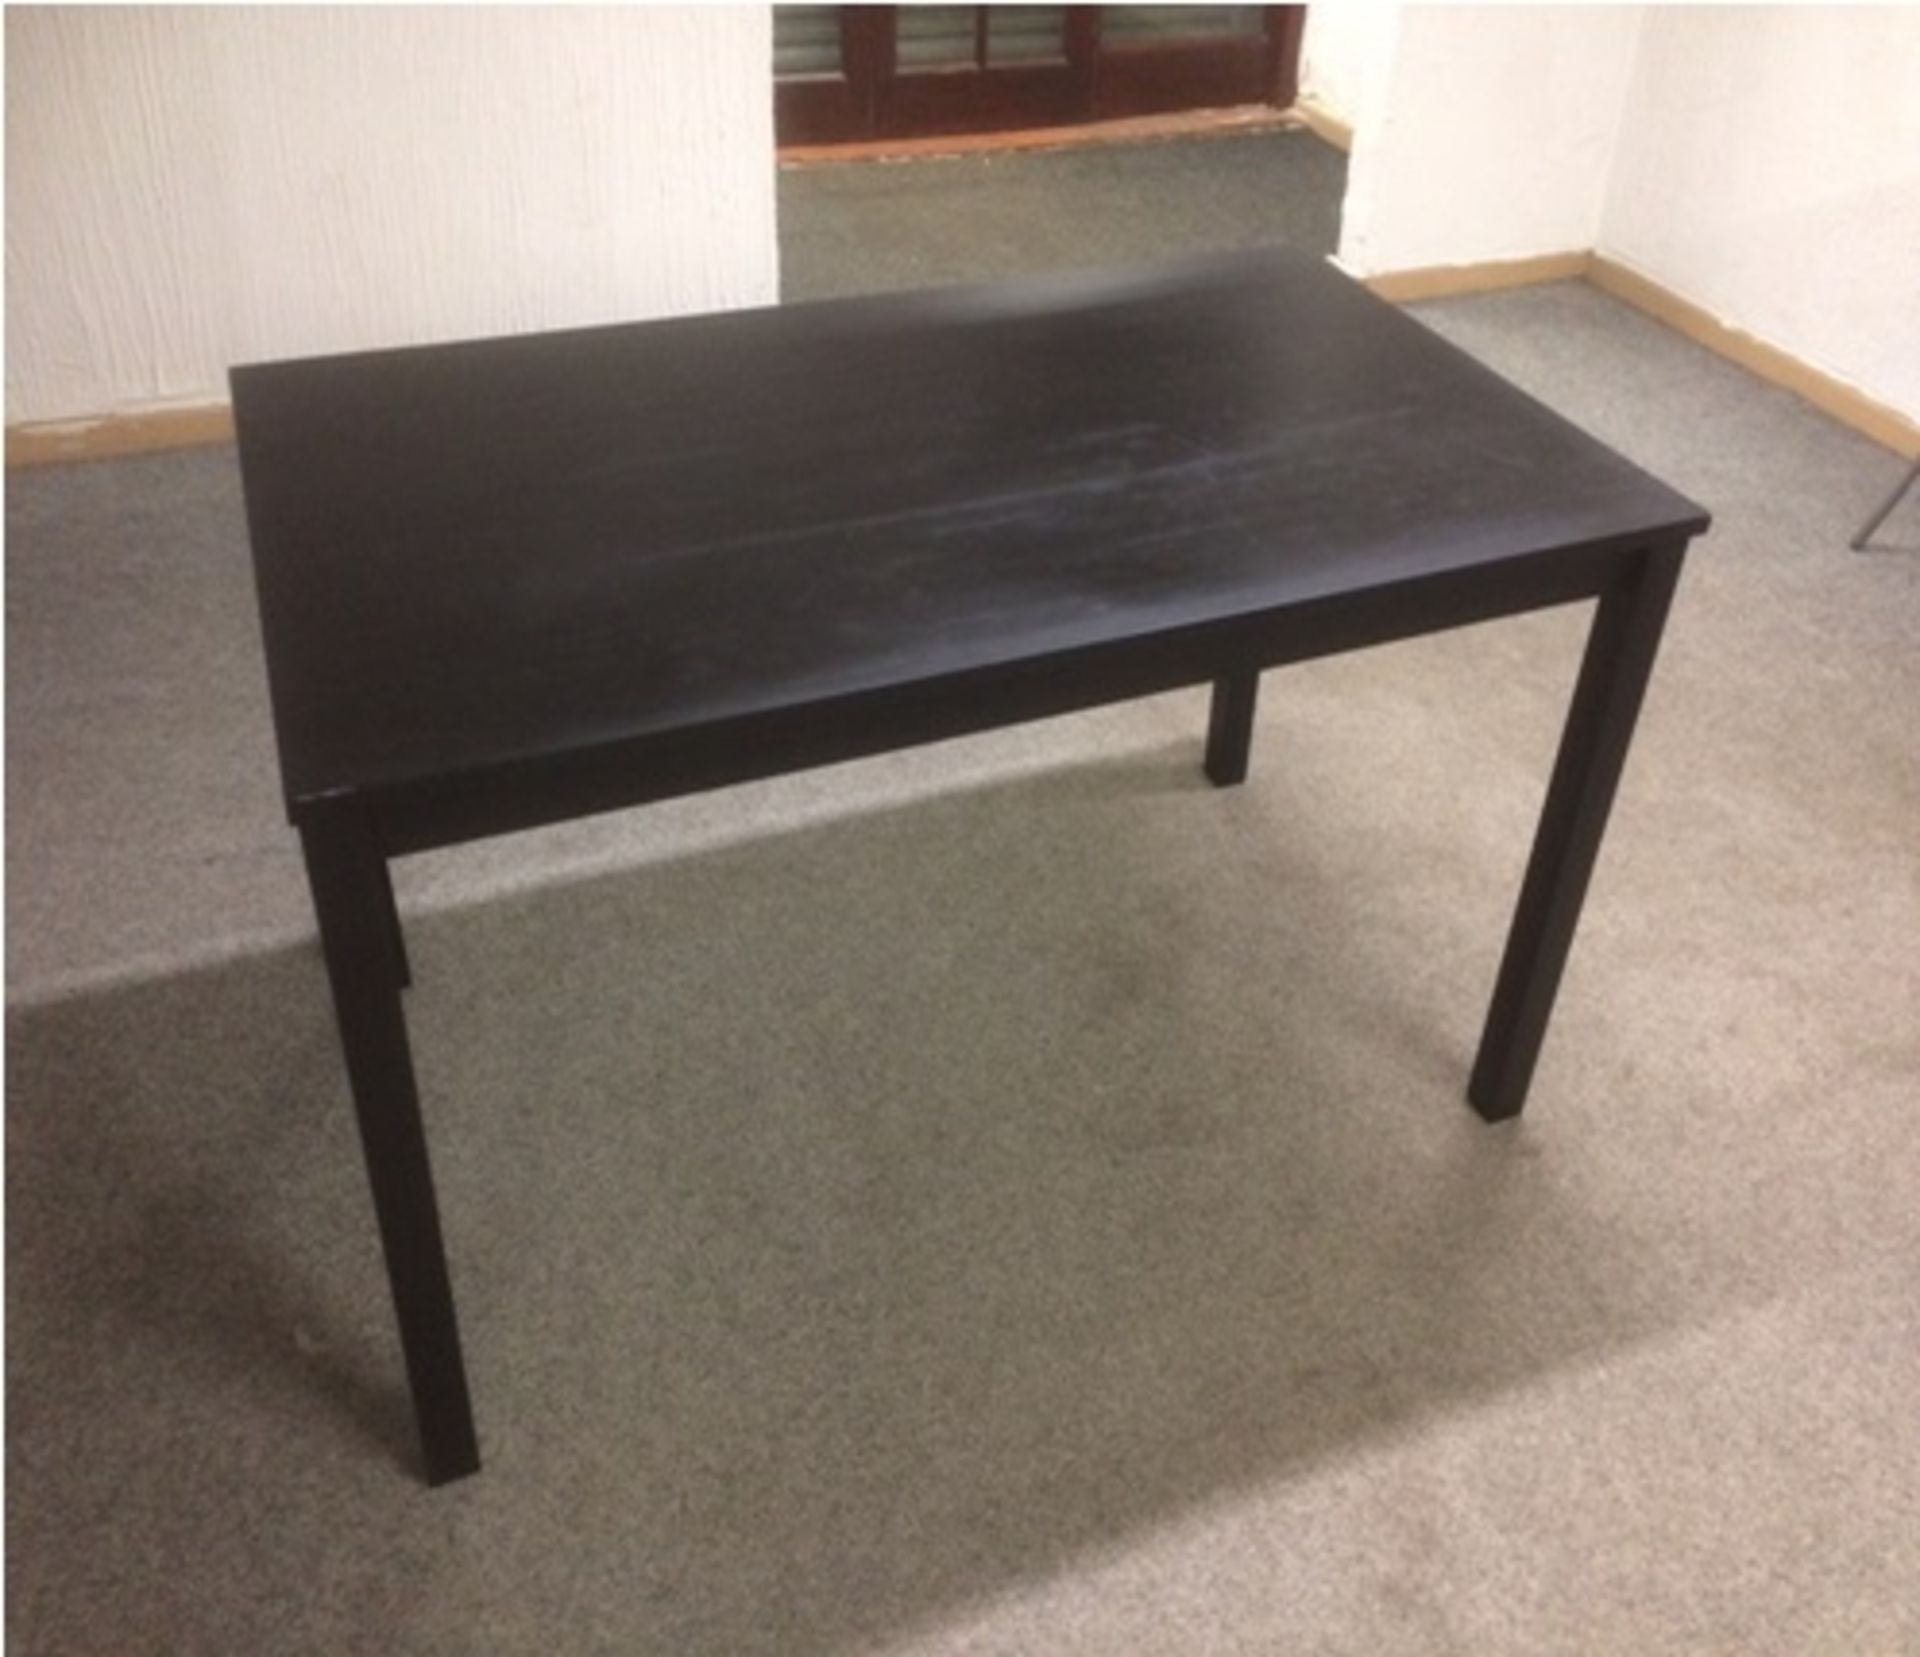 1 x Black Wooden Dining Table 4 Seater - New & Boxed